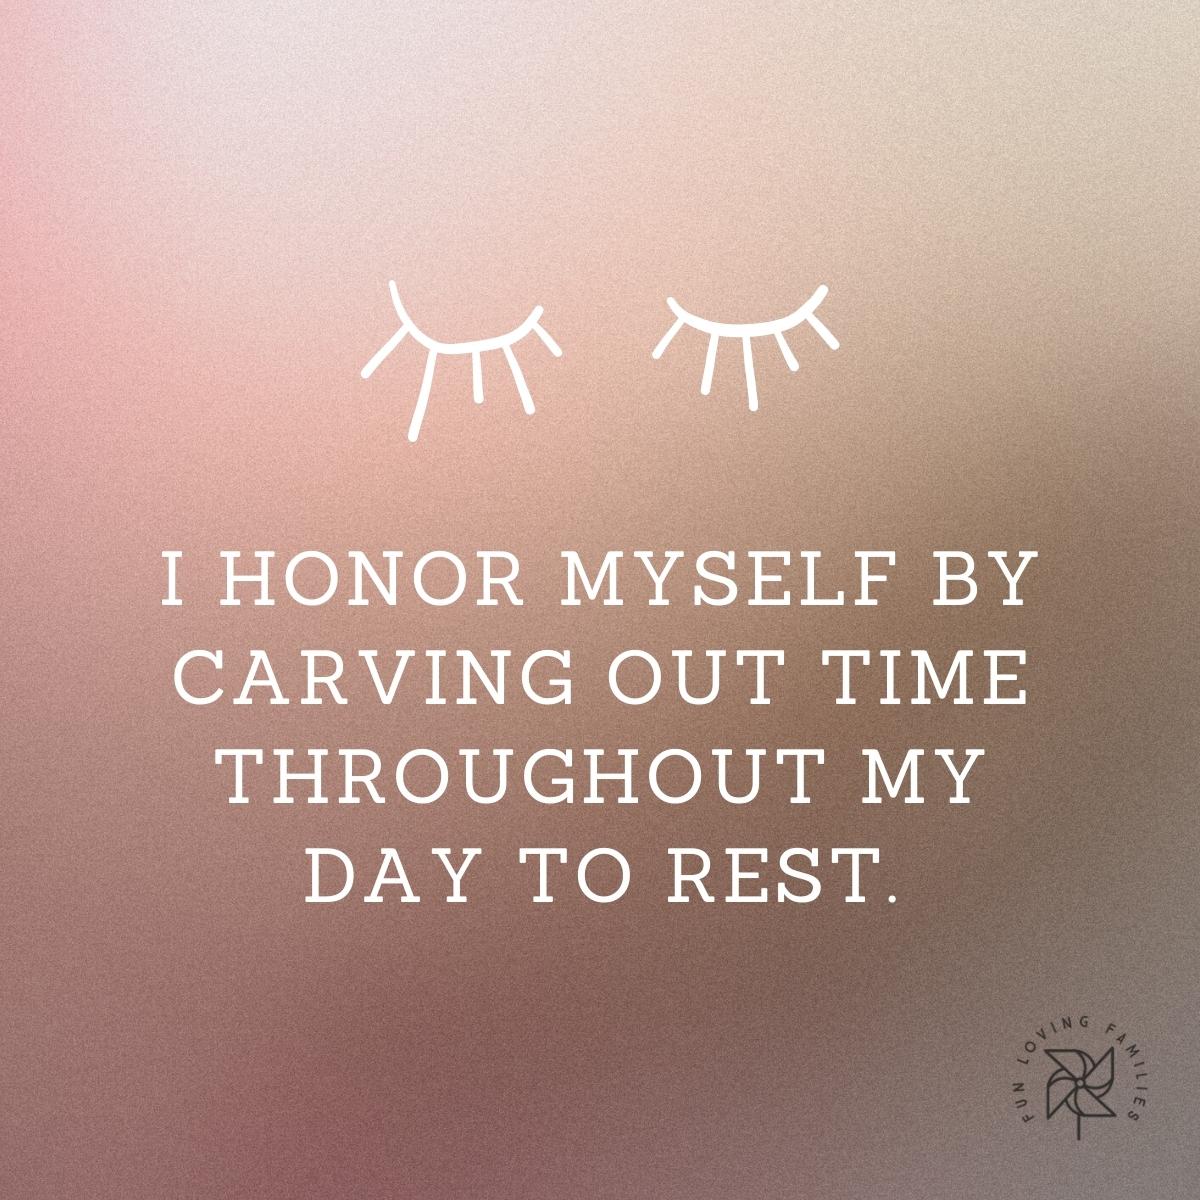 I honor myself by carving out time throughout my day to rest affirmation